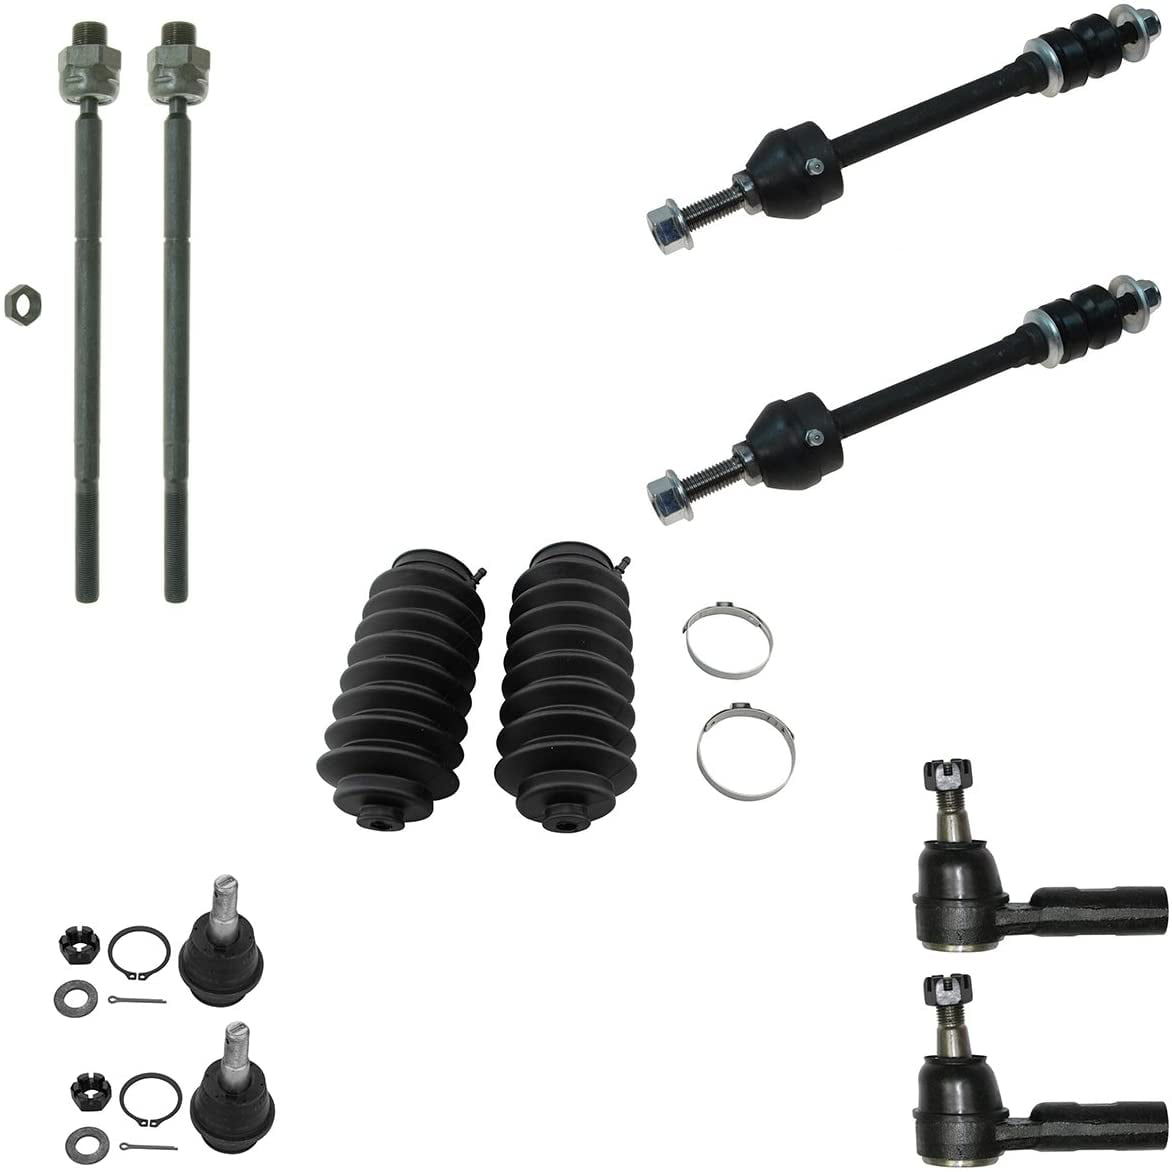 RAM Mounts 10 Pc Suspension Kit for Dodge Ram 1500 2006-2008 Tie Rods Sway Bar Ball Joints 